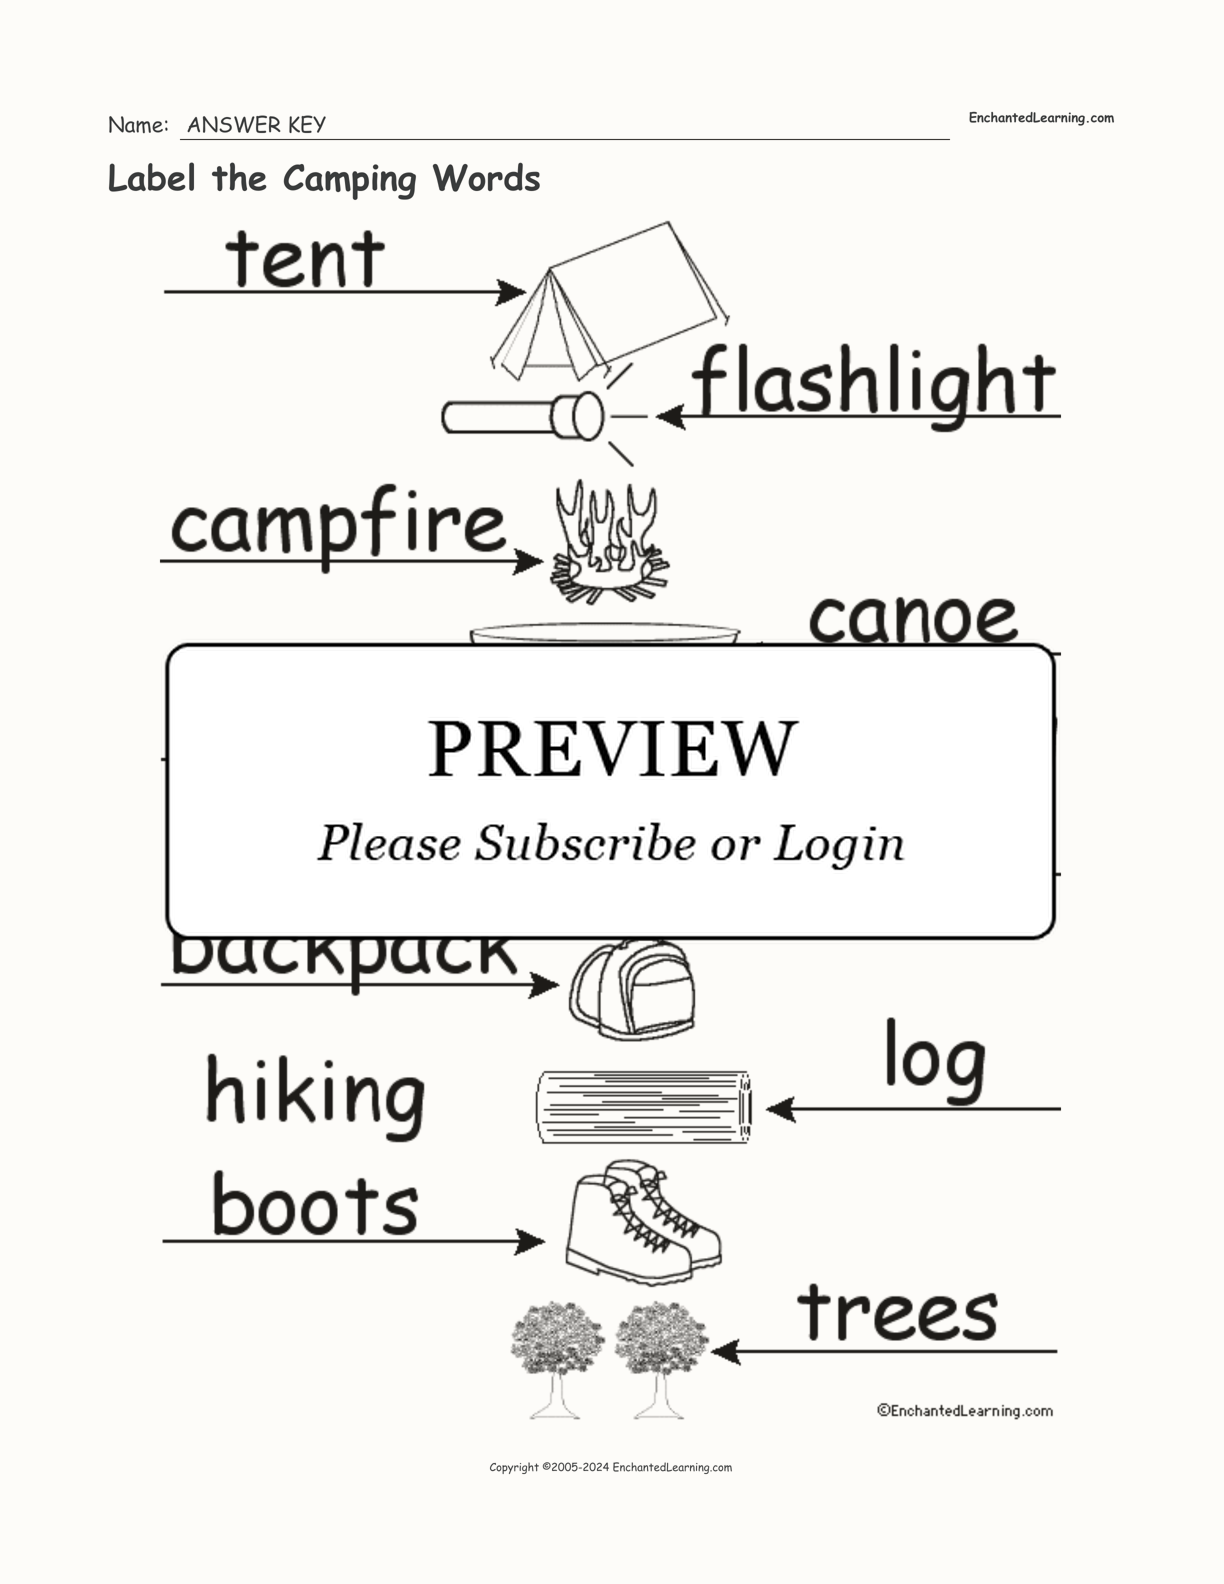 Label the Camping Words interactive worksheet page 2